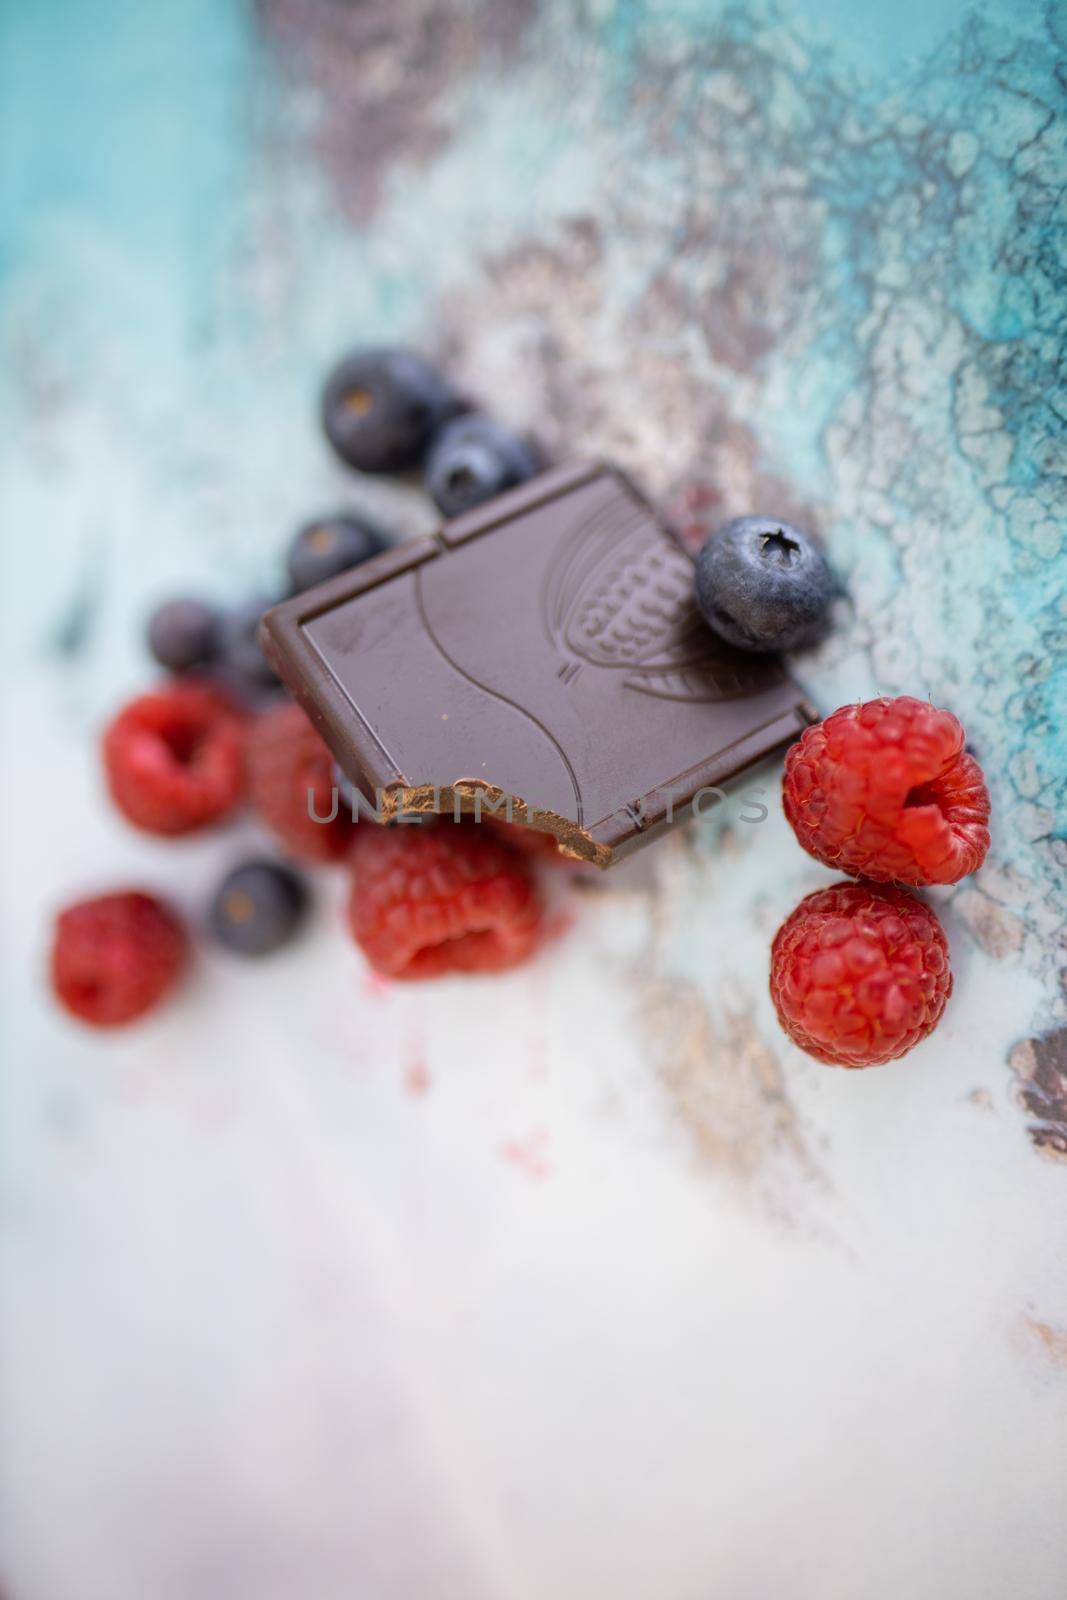 Bitten chocolate bar leaning against raspberries and blueberries on colorful placemat. Dark cacao bar and fruit on table from above. Fresh berries and chocolate